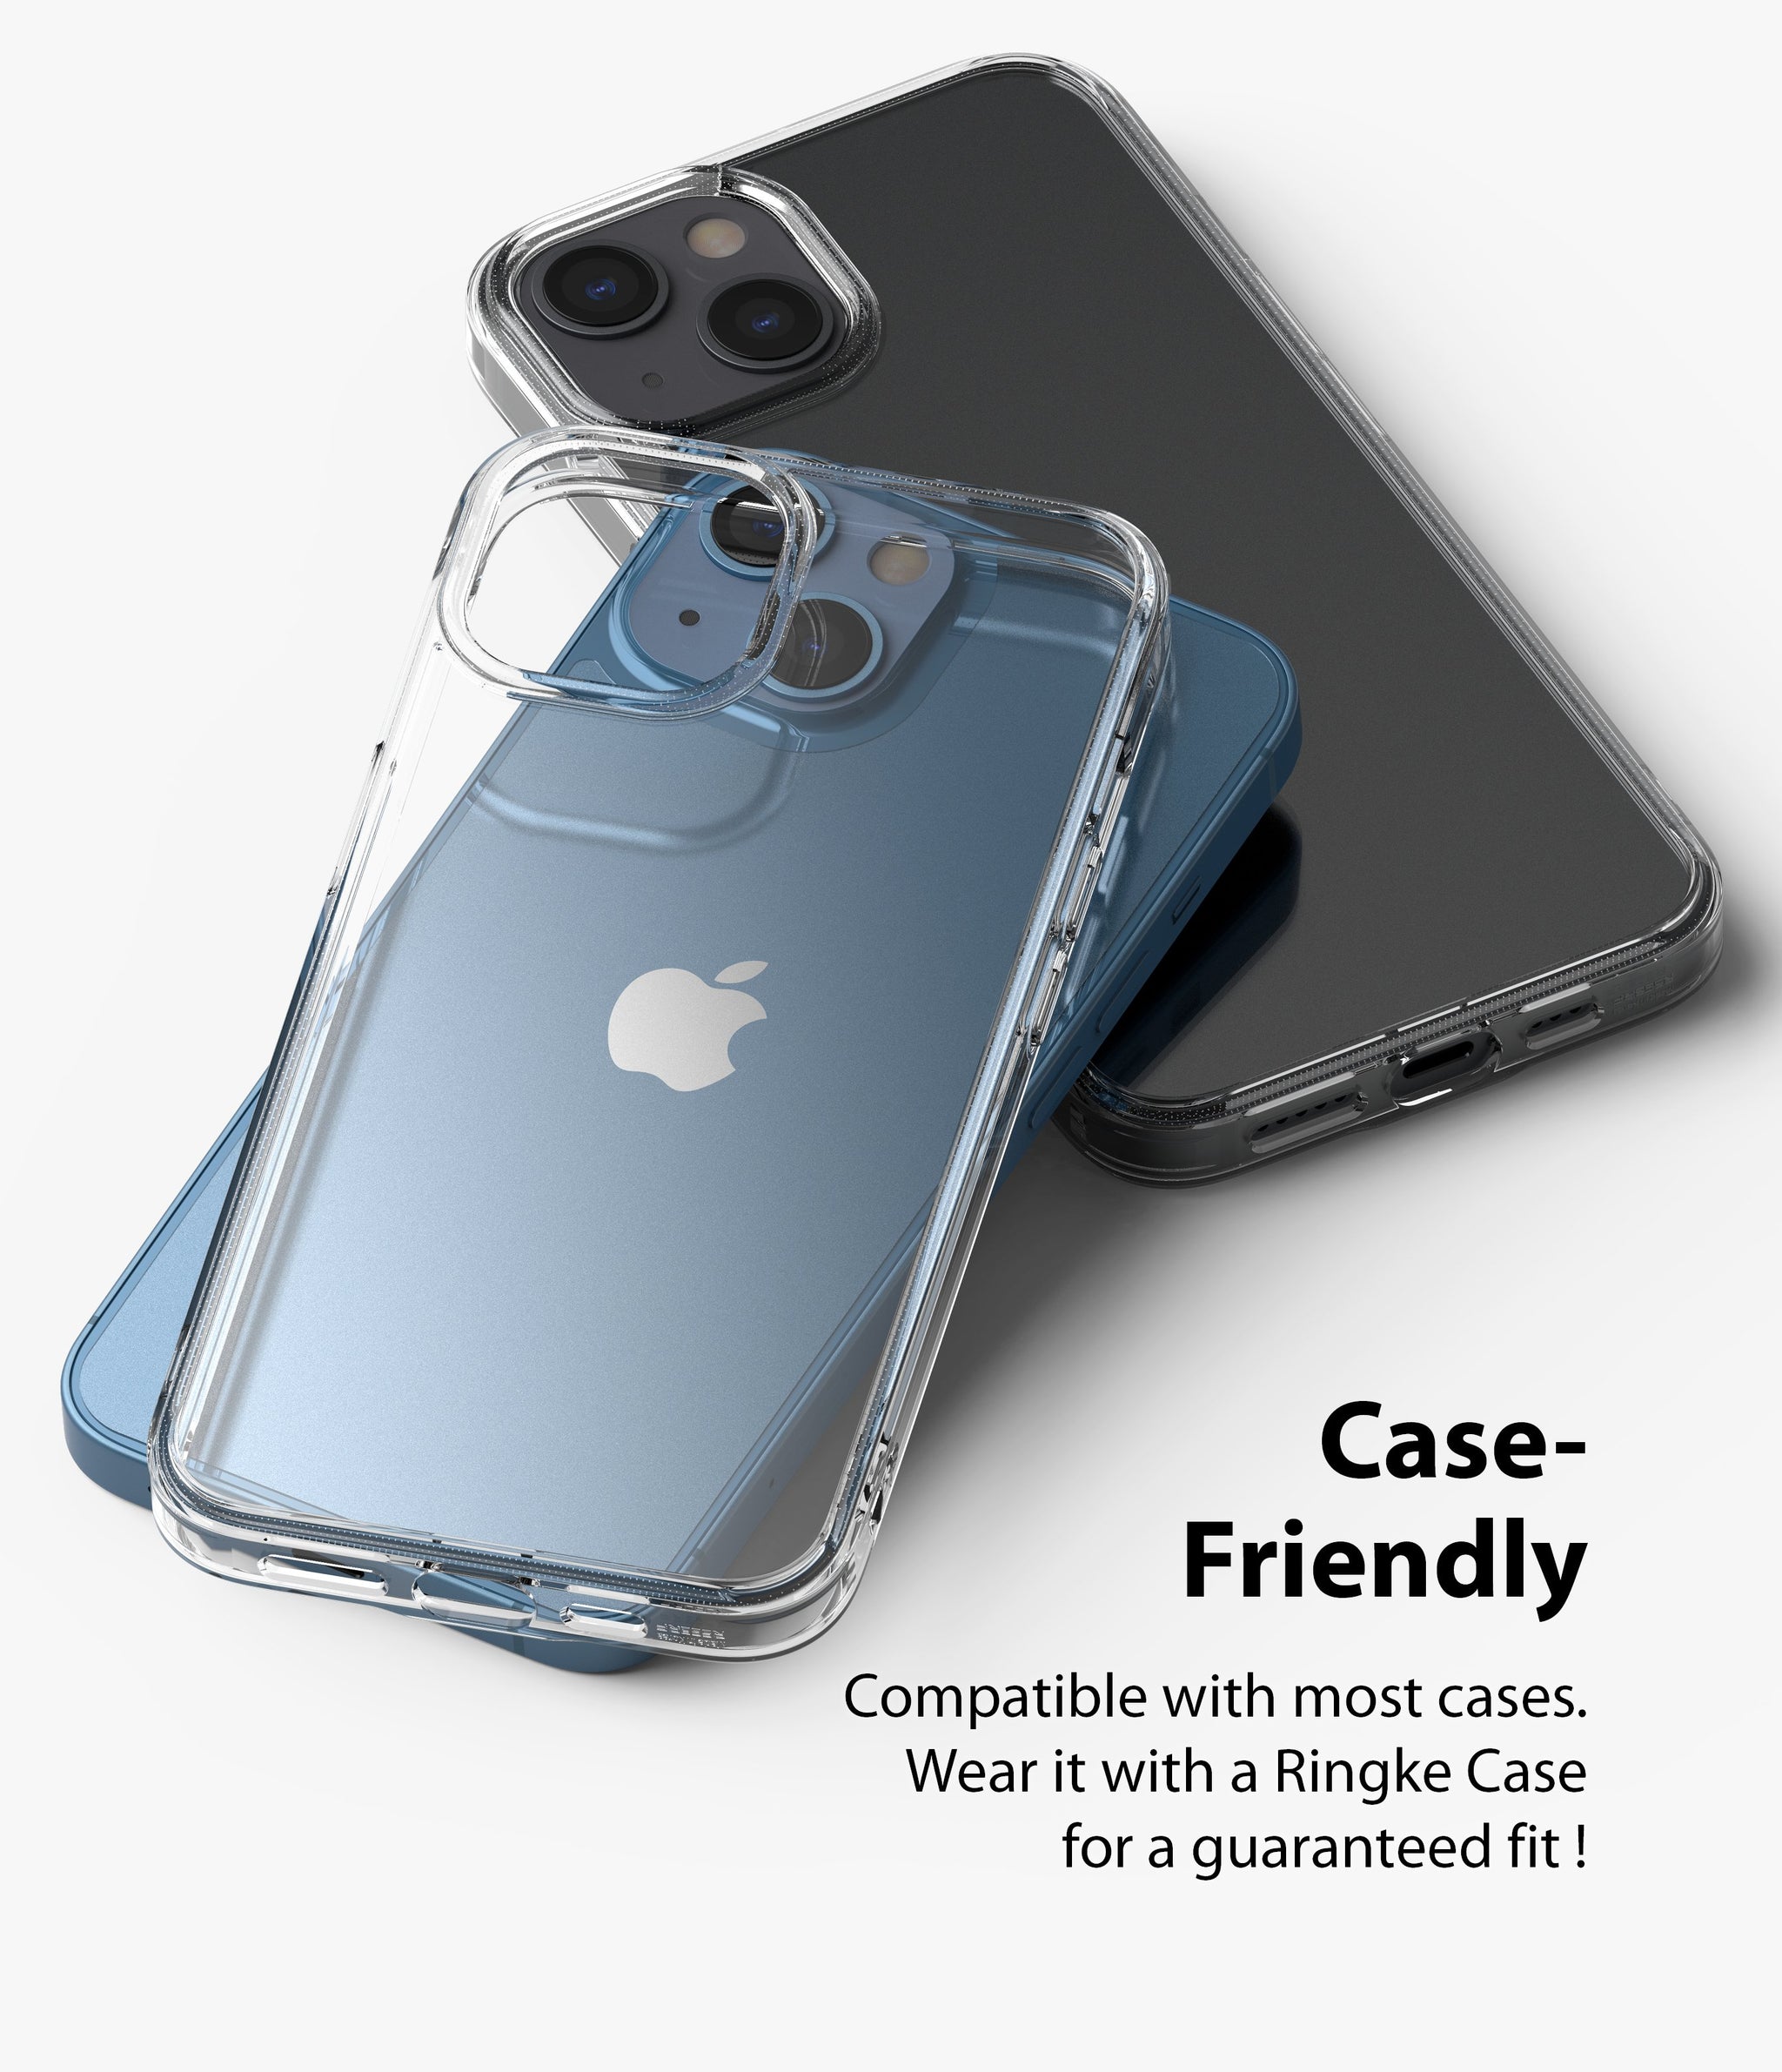 iPhone 13 Back Screen Protector | Invisible Defender - Case-Friendly. Compatible with most cases. Wear it with Ringke Case for a guaranteed fit.